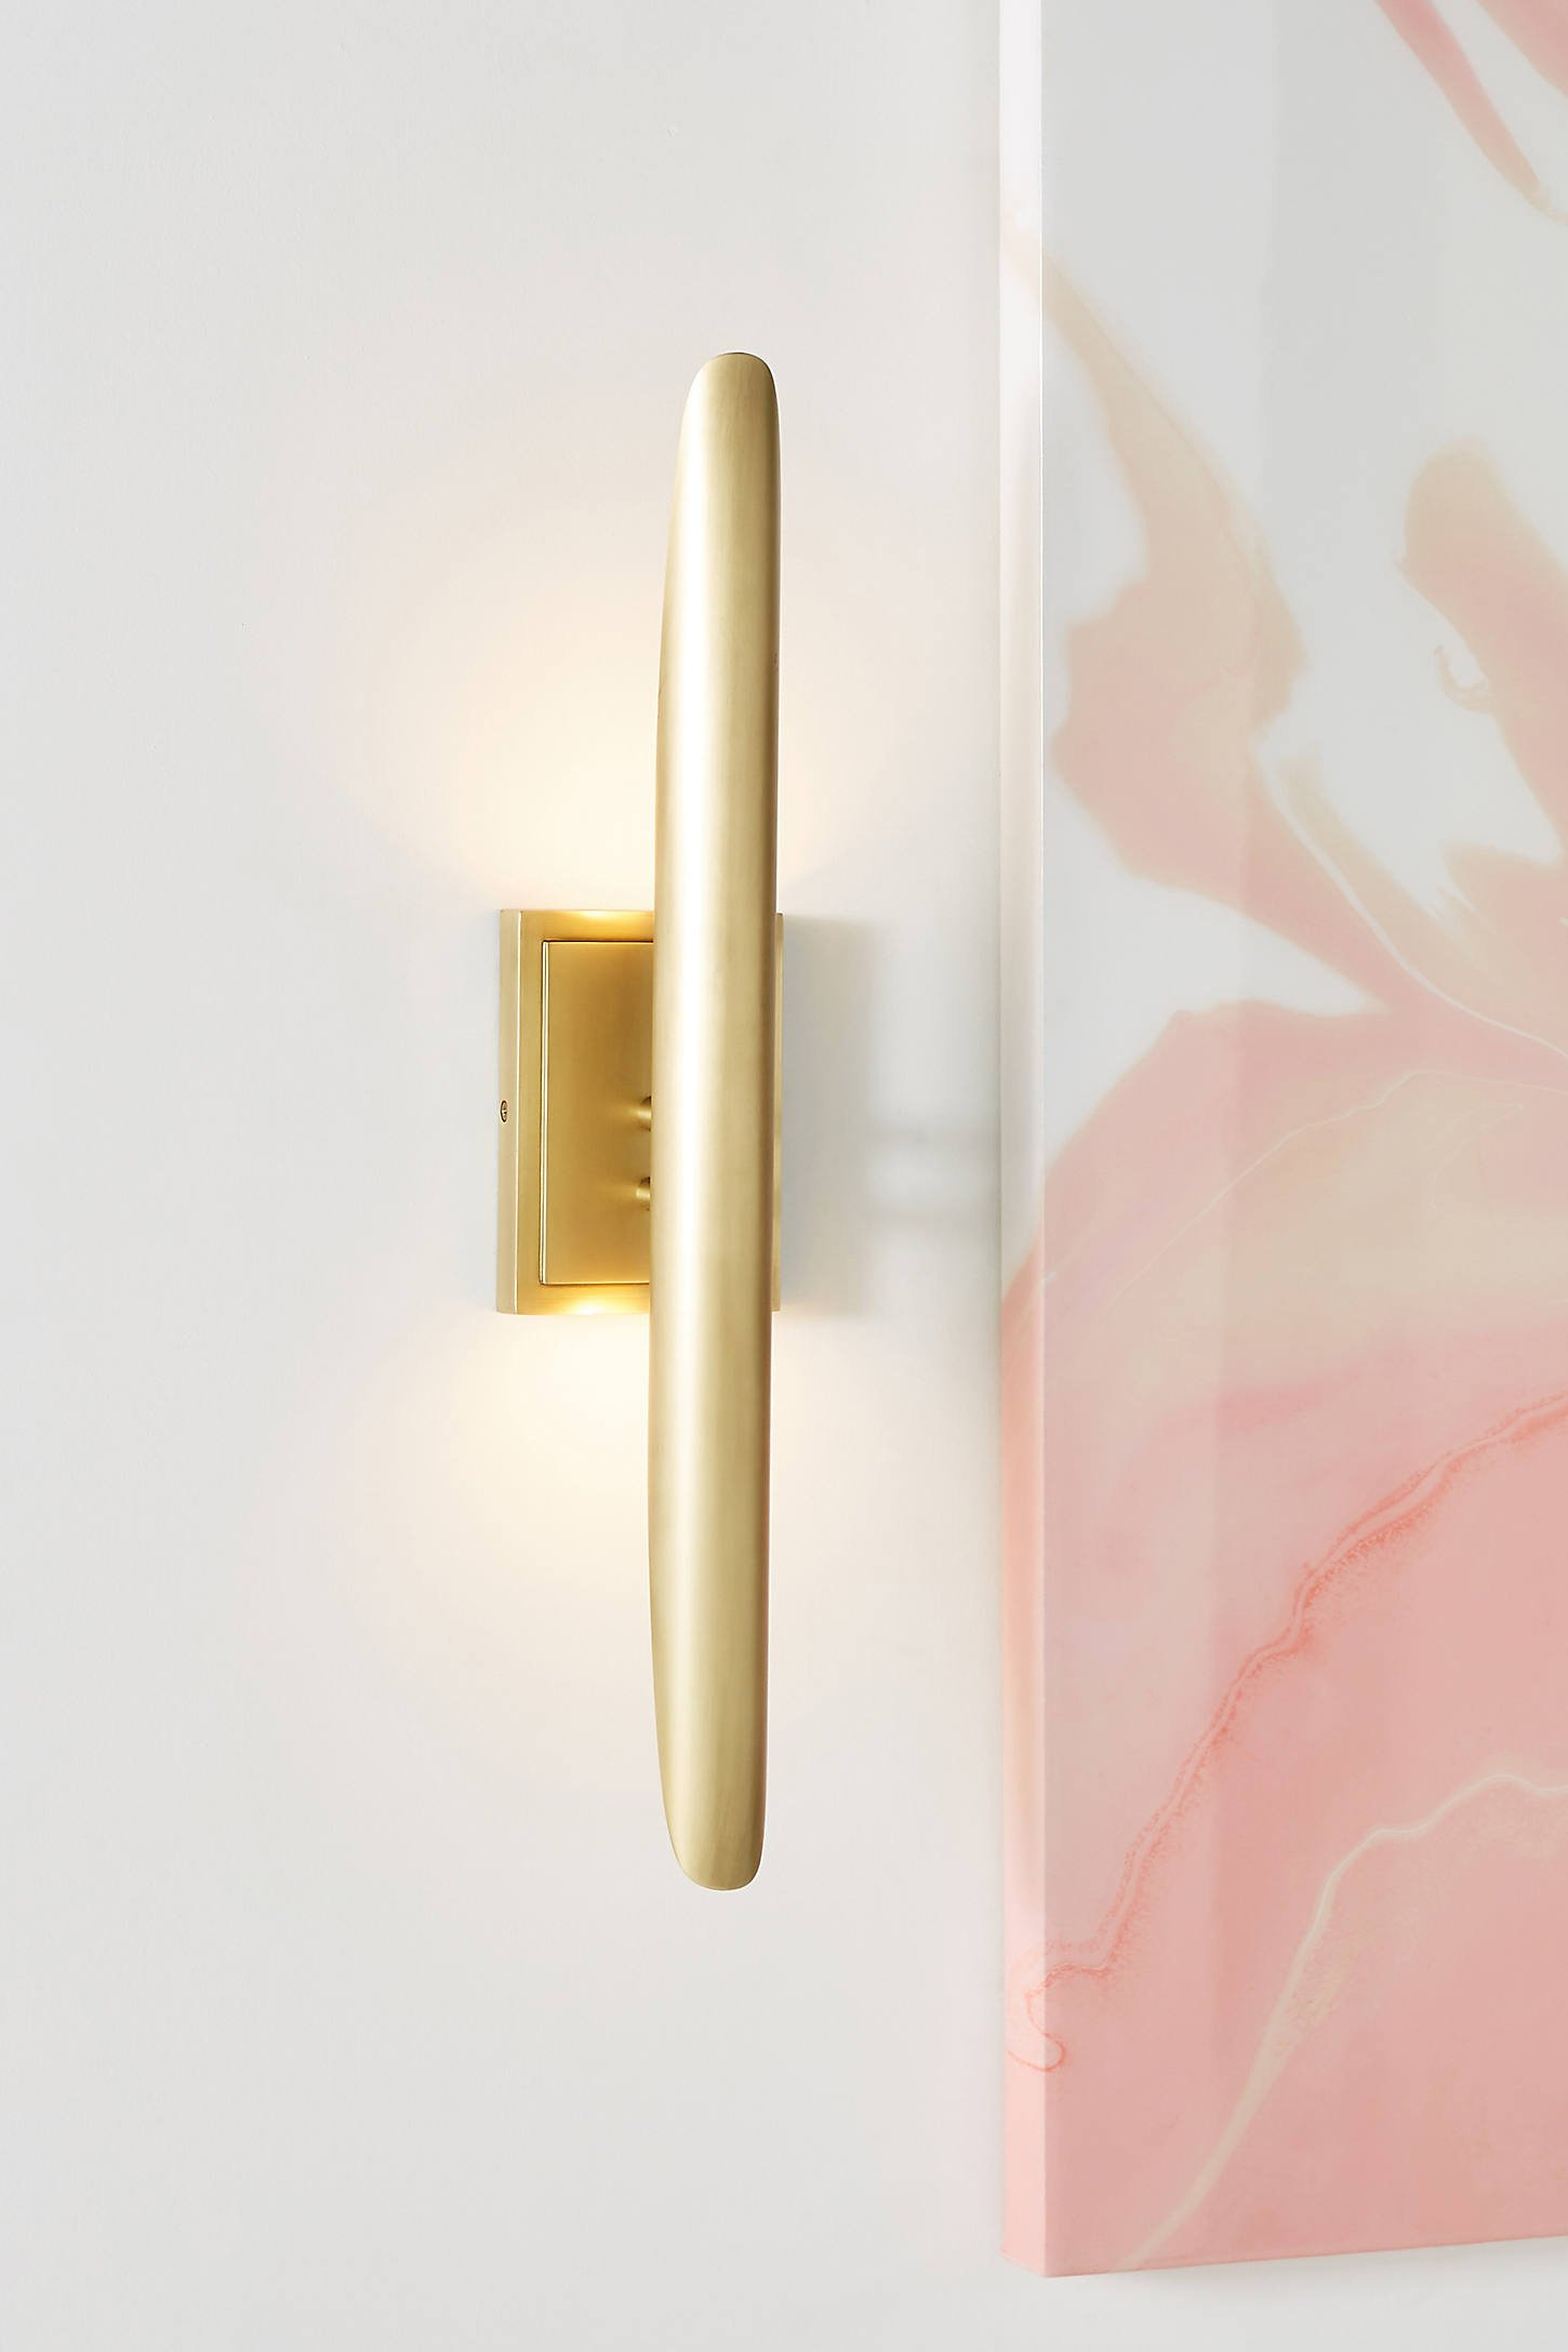 Redford Sconce - Anthropologie